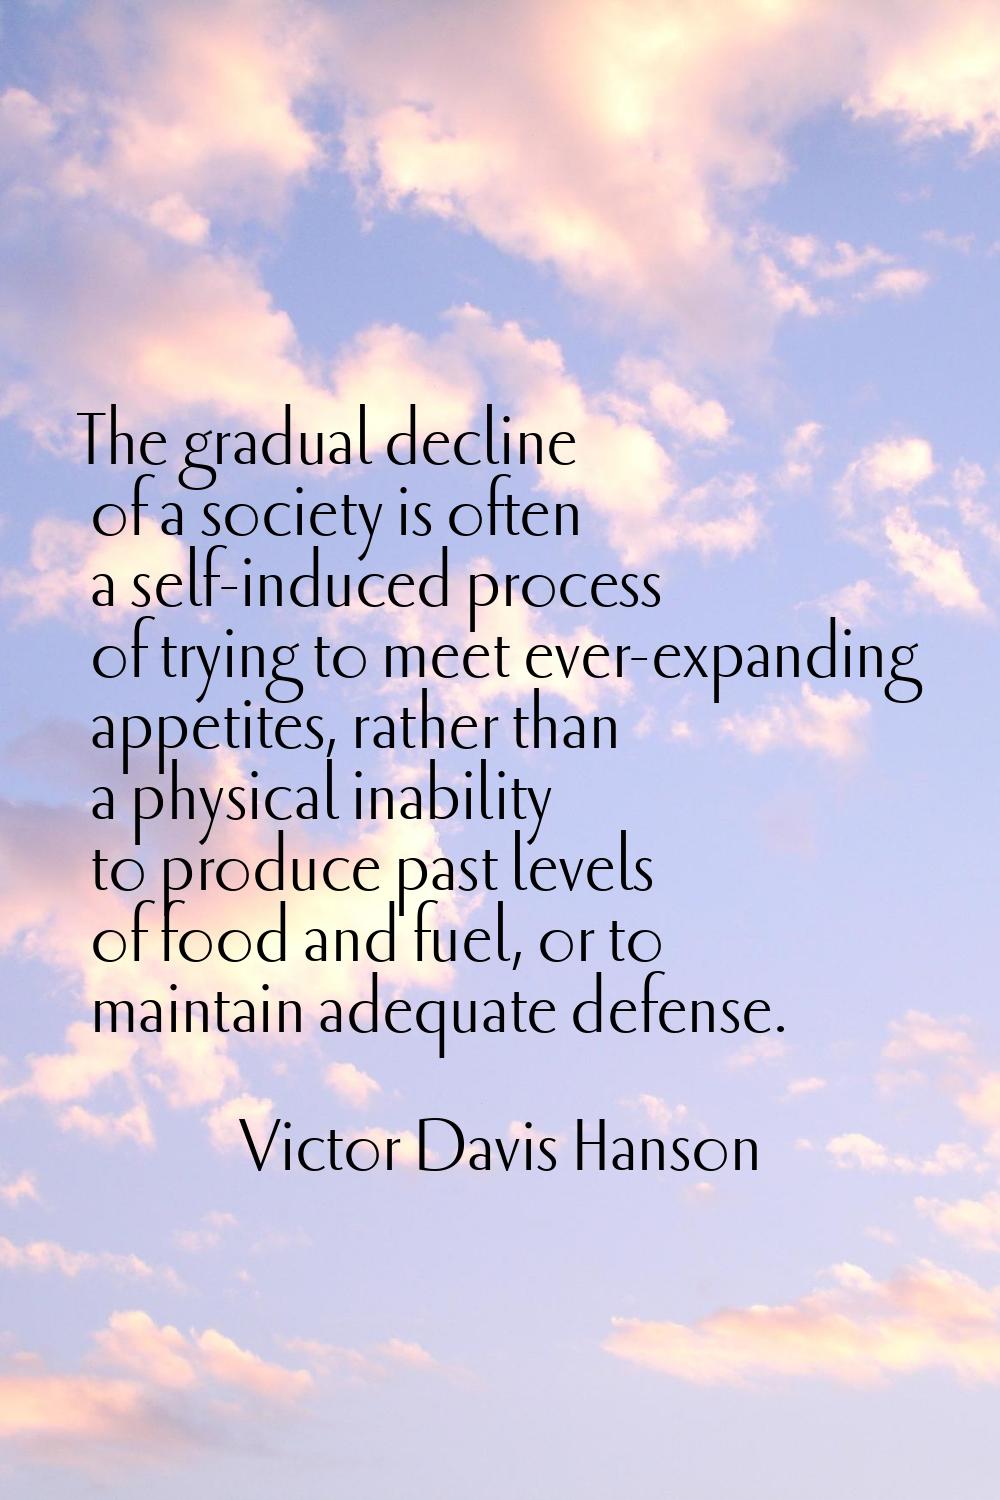 The gradual decline of a society is often a self-induced process of trying to meet ever-expanding a